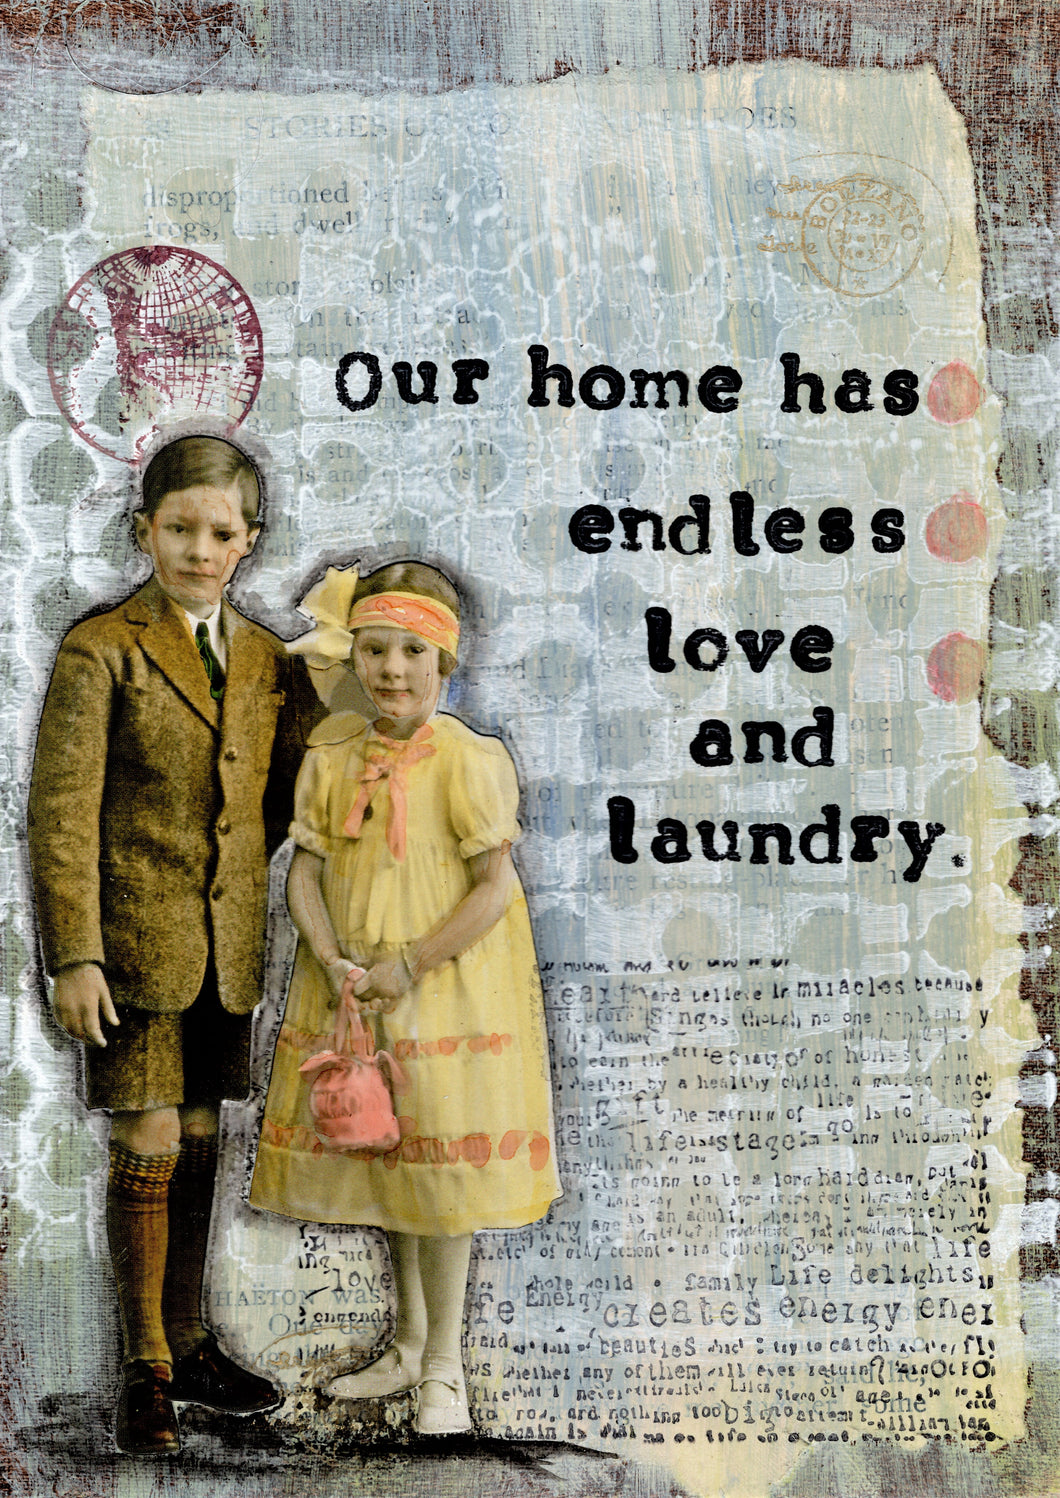 Our home had endless love and laundry.